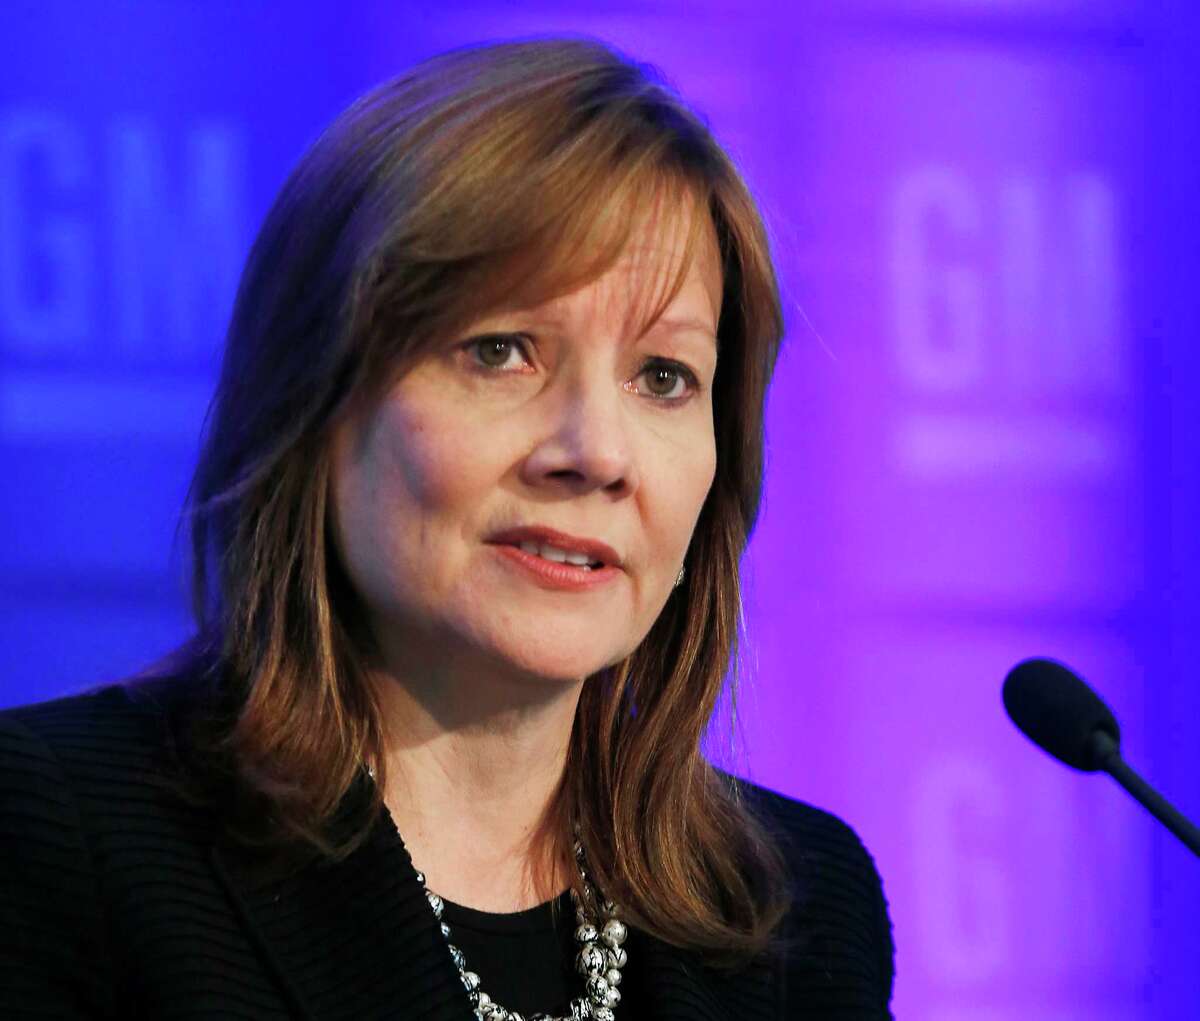 FILE - In this June 10, 2014 file photo General Motors CEO Mary Barra speaks to shareholders in Detroit. Barra is the keynote speaker Sunday, Sept. 7, 2014 at an intelligent transportation conference in Detroit. GM and other automakersÂ will announceÂ new devices that will make roads safer. The devices are steps toward self-driving cars in the future. (AP Photo/Paul Sancya, File)